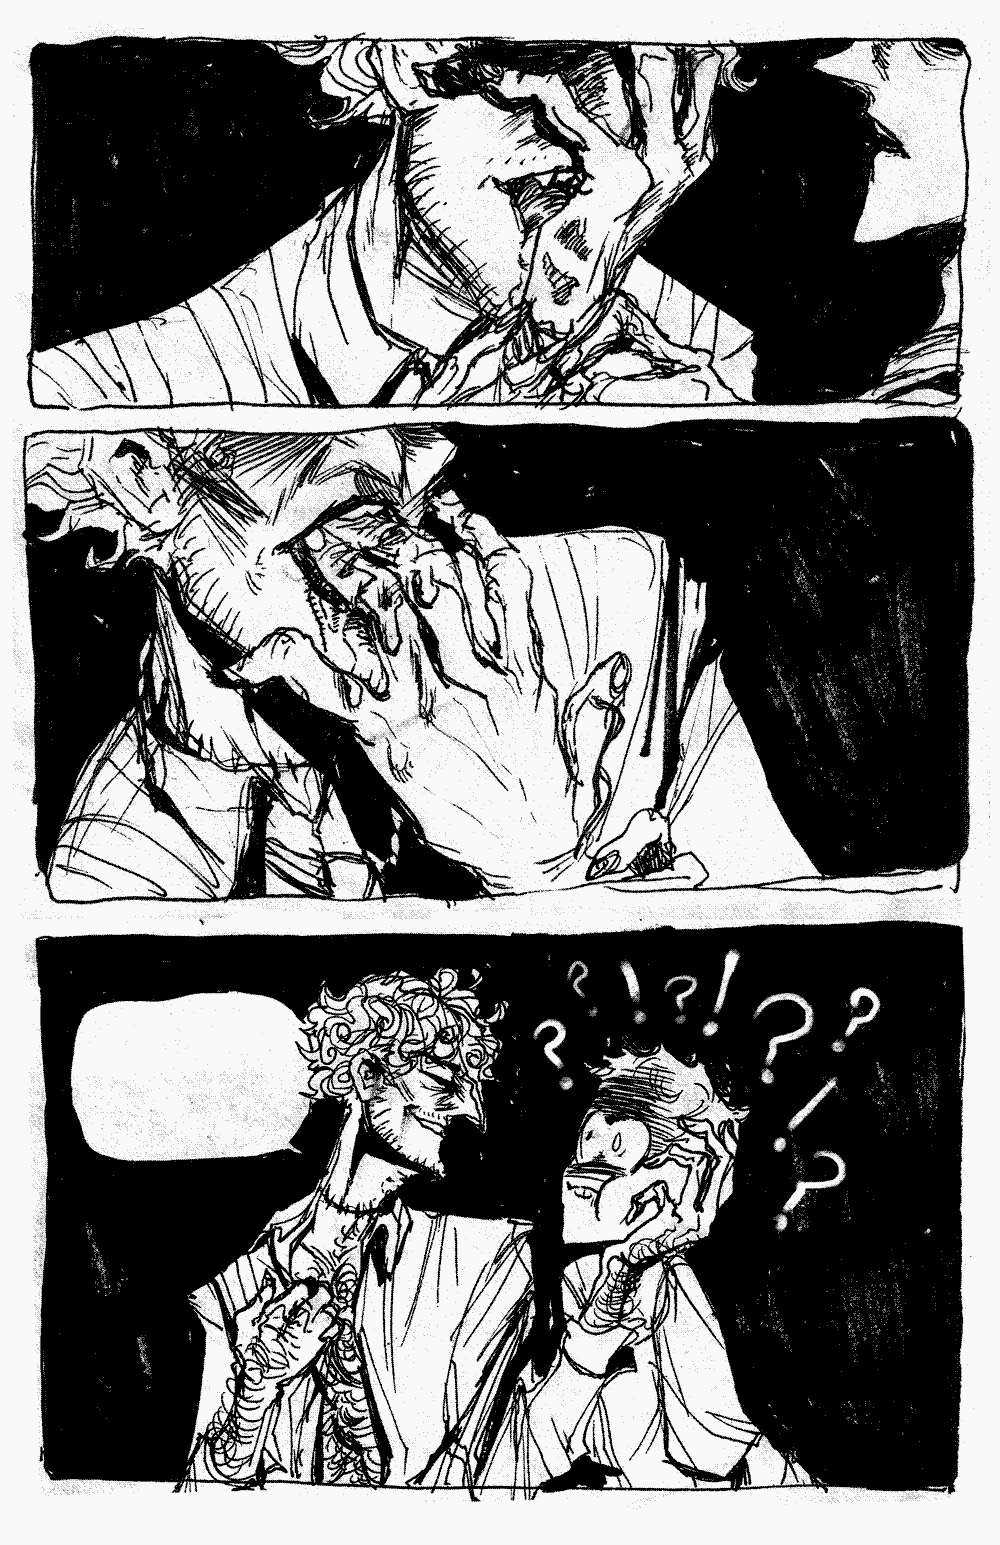 Page 6 - Older man licks the sperm off of the younger man's hand.  He sucks his fingers.  He caresses the small man's surprised face, saying something that the smaller man cannot comprehend in his incredulously aroused mood.